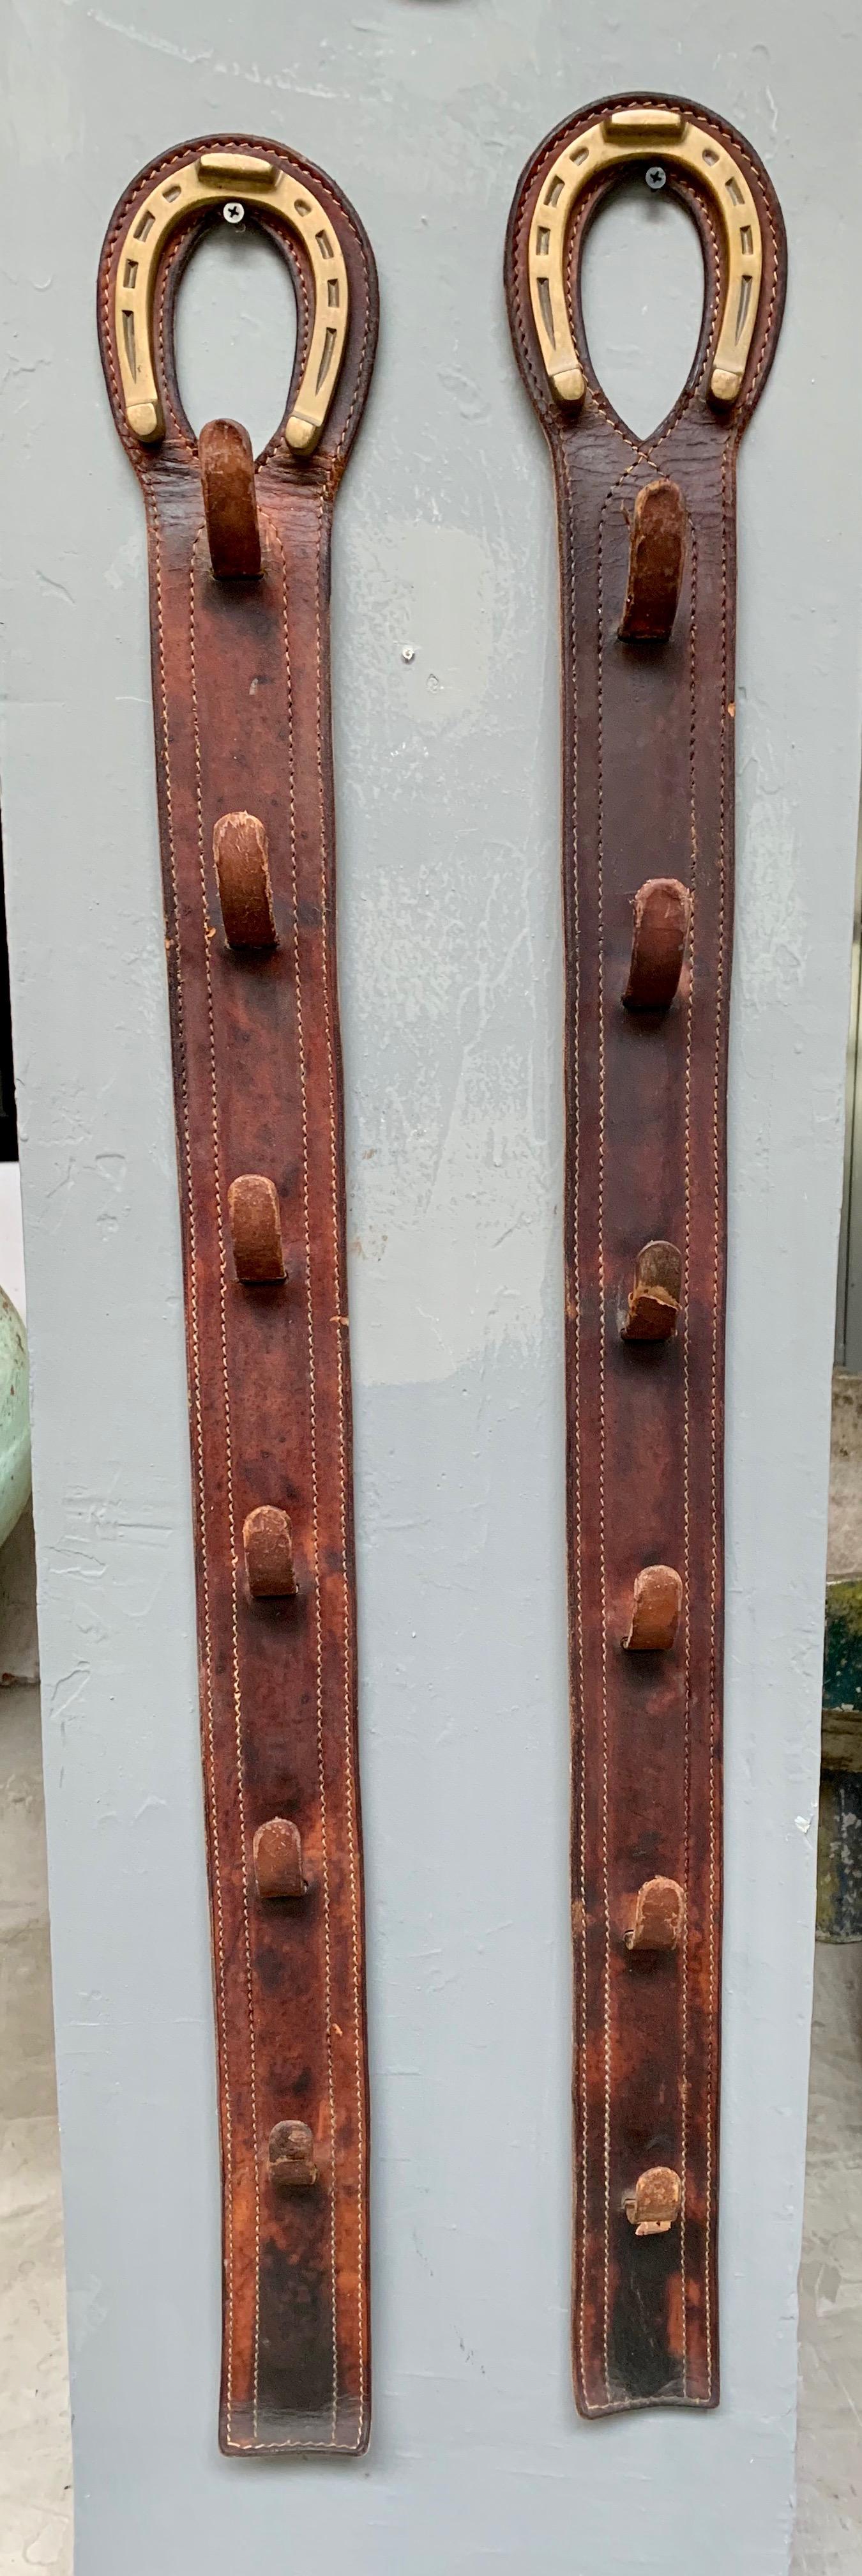 Handsome pair of coat hooks by French designer Jacques Adnet. Completely wrapped in saddle leather with brass horseshoe at top. Each pieces has a set of 6 vertical tongue hooks. Signature Adnet contrast stitching. Great patina to leather. Good